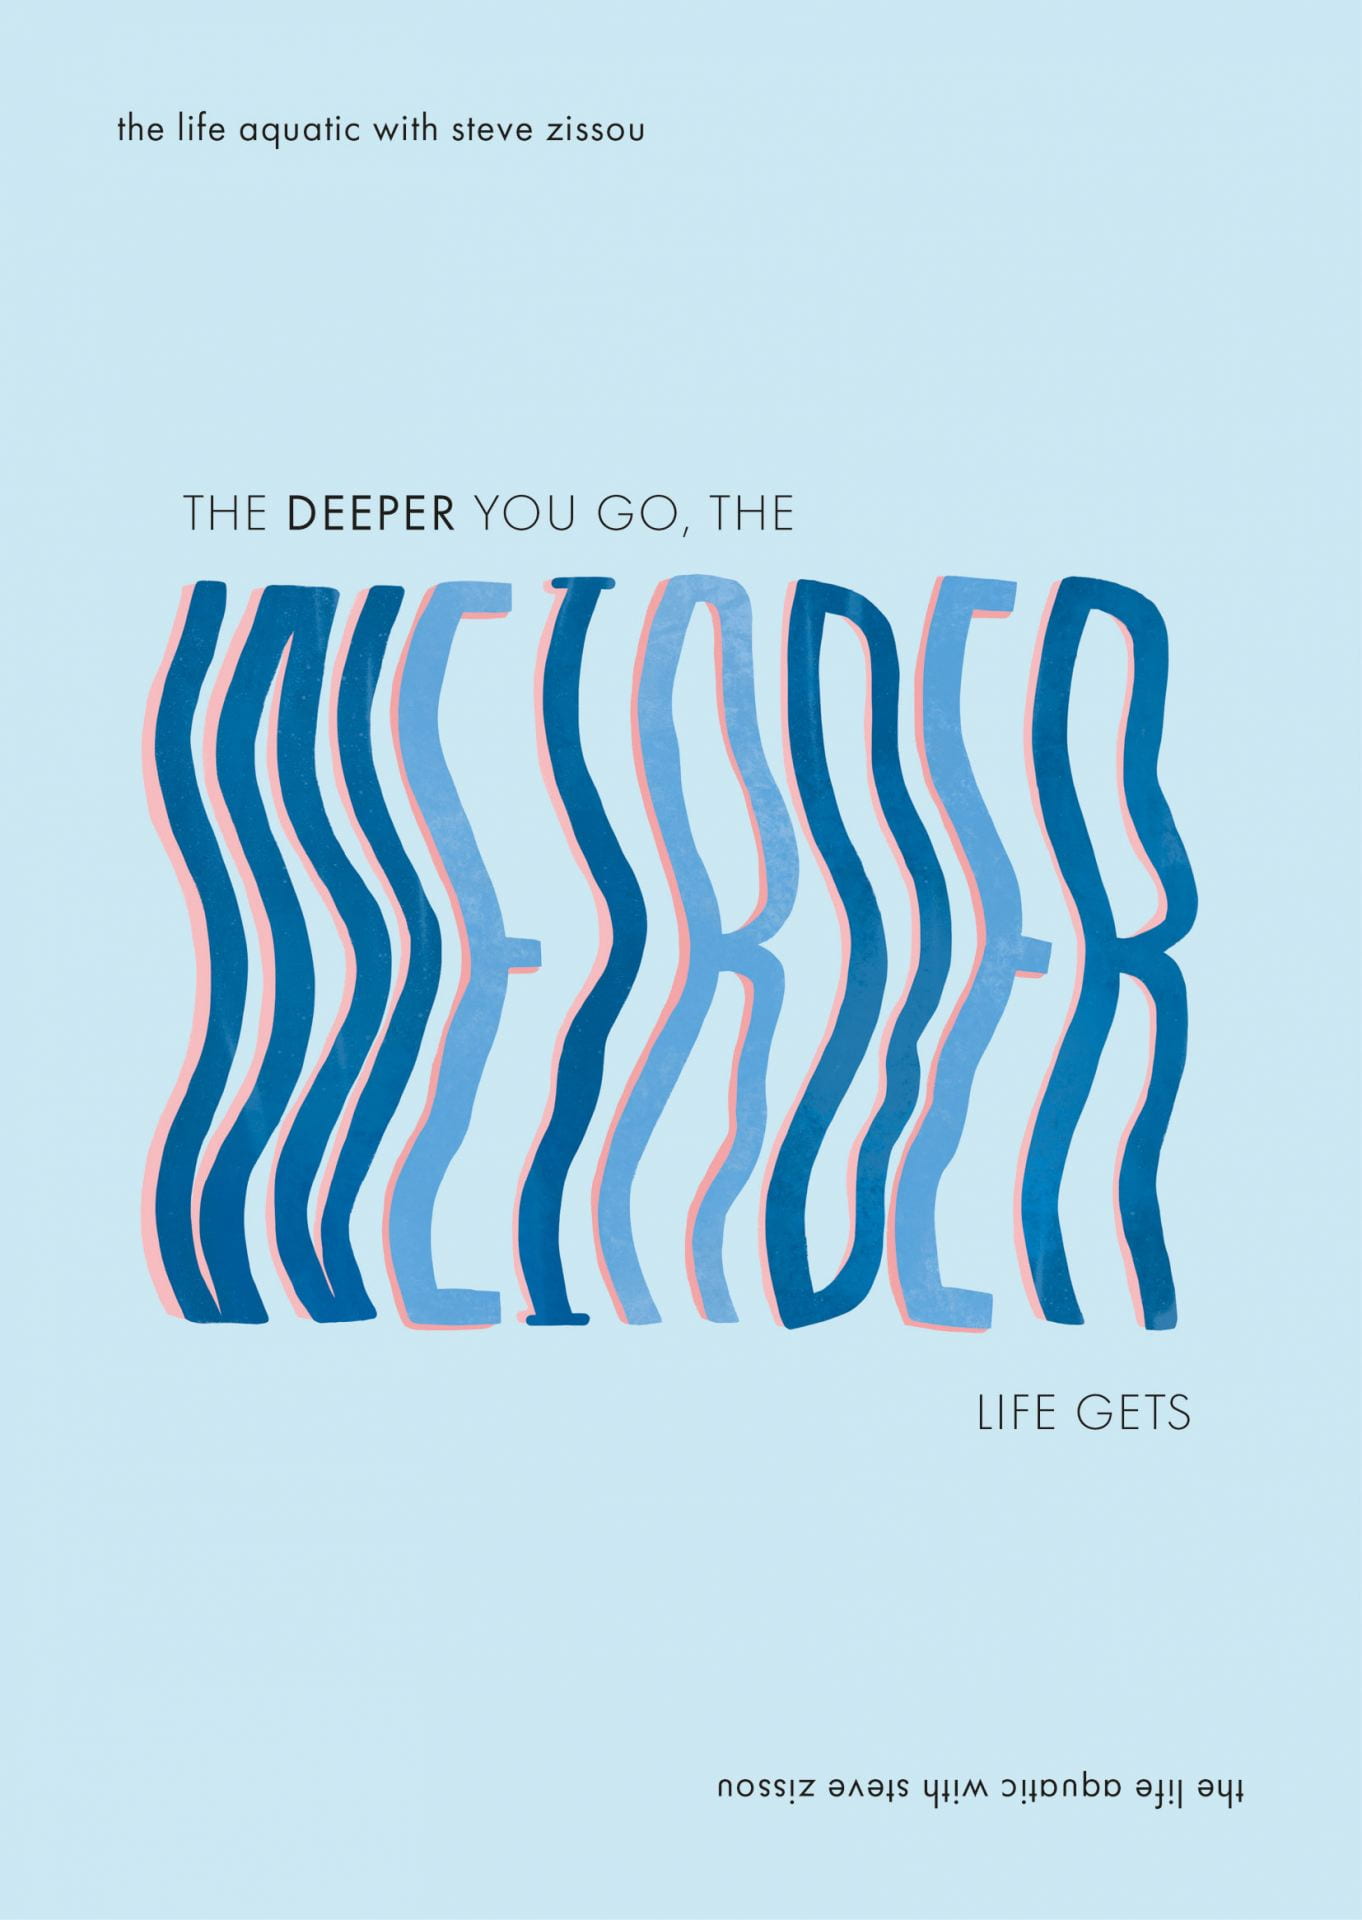 Text reads: 'The Deeper You Go, The Weirder Life Gets' on a baby blue background, the word 'Weirder' is displayed in a blue, large wavey typeface.